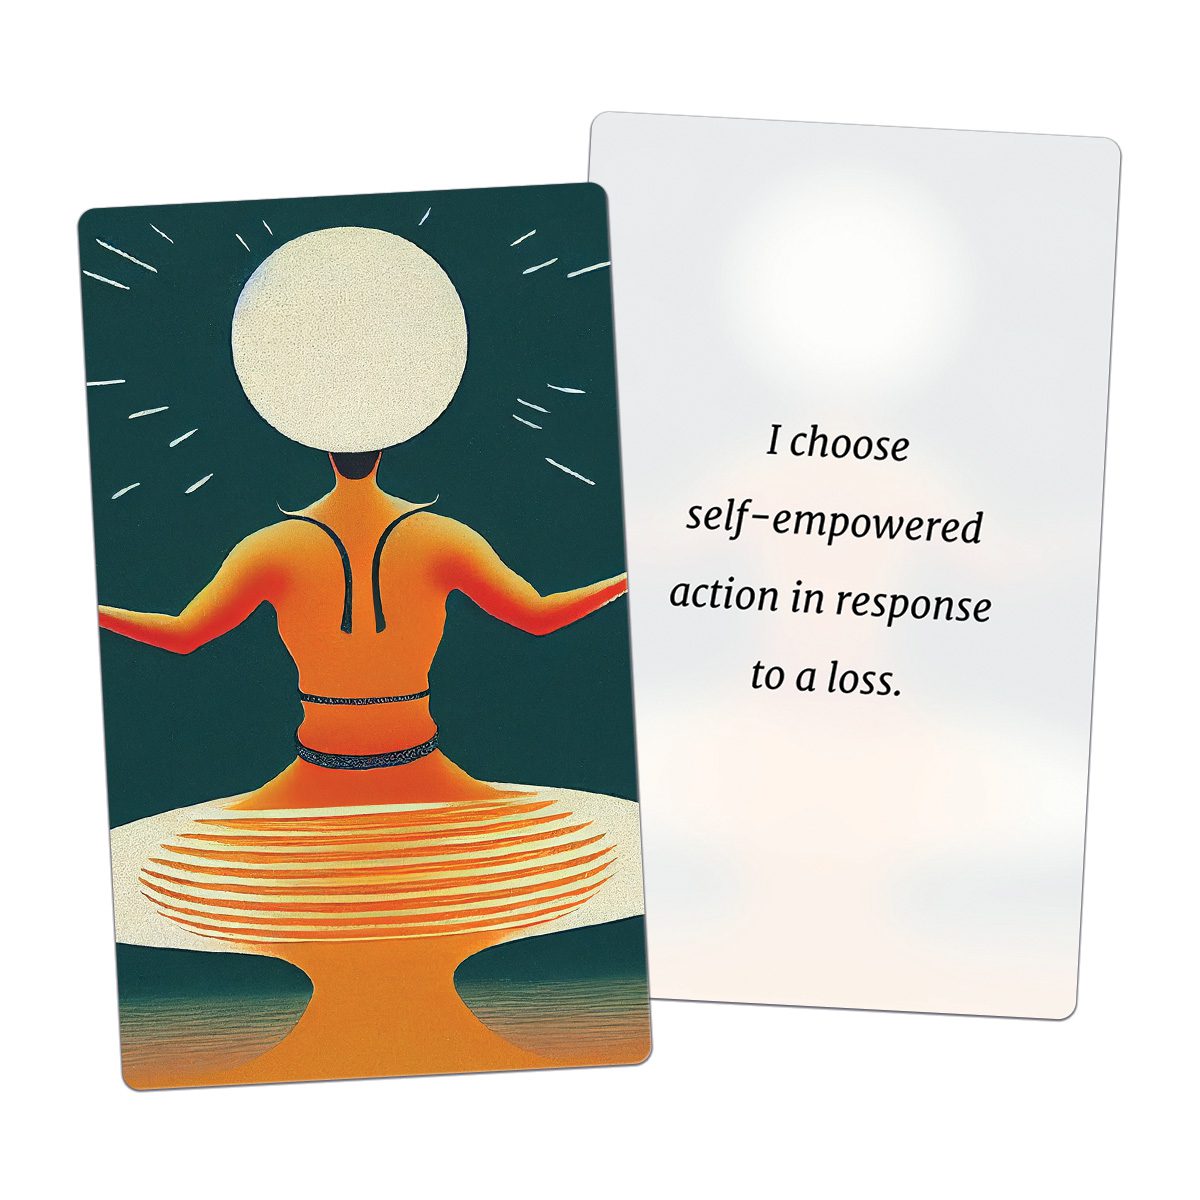 I choose self-empowered action in response to a loss. (AFFIRMATION CARD)